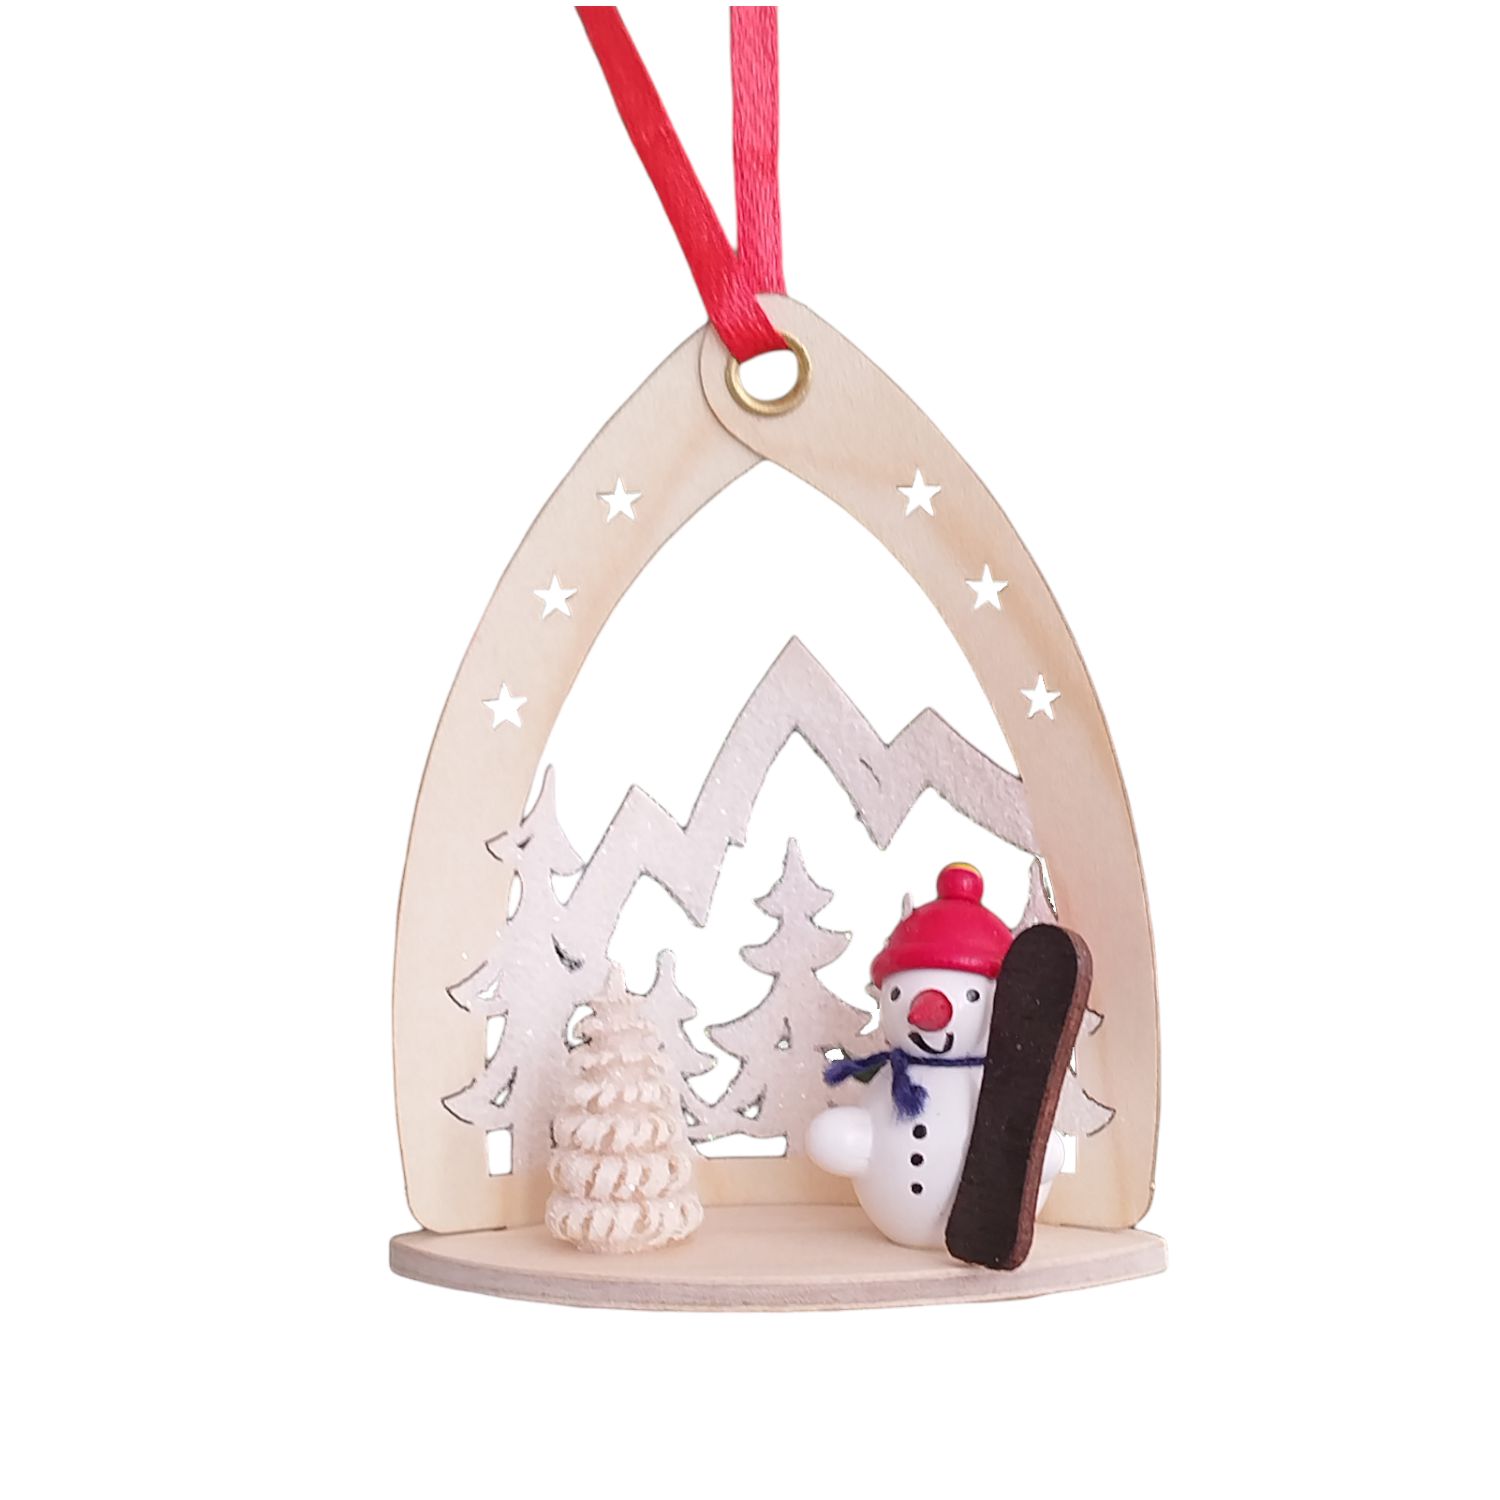 Tree hanging snowman in front of winter landscape, red